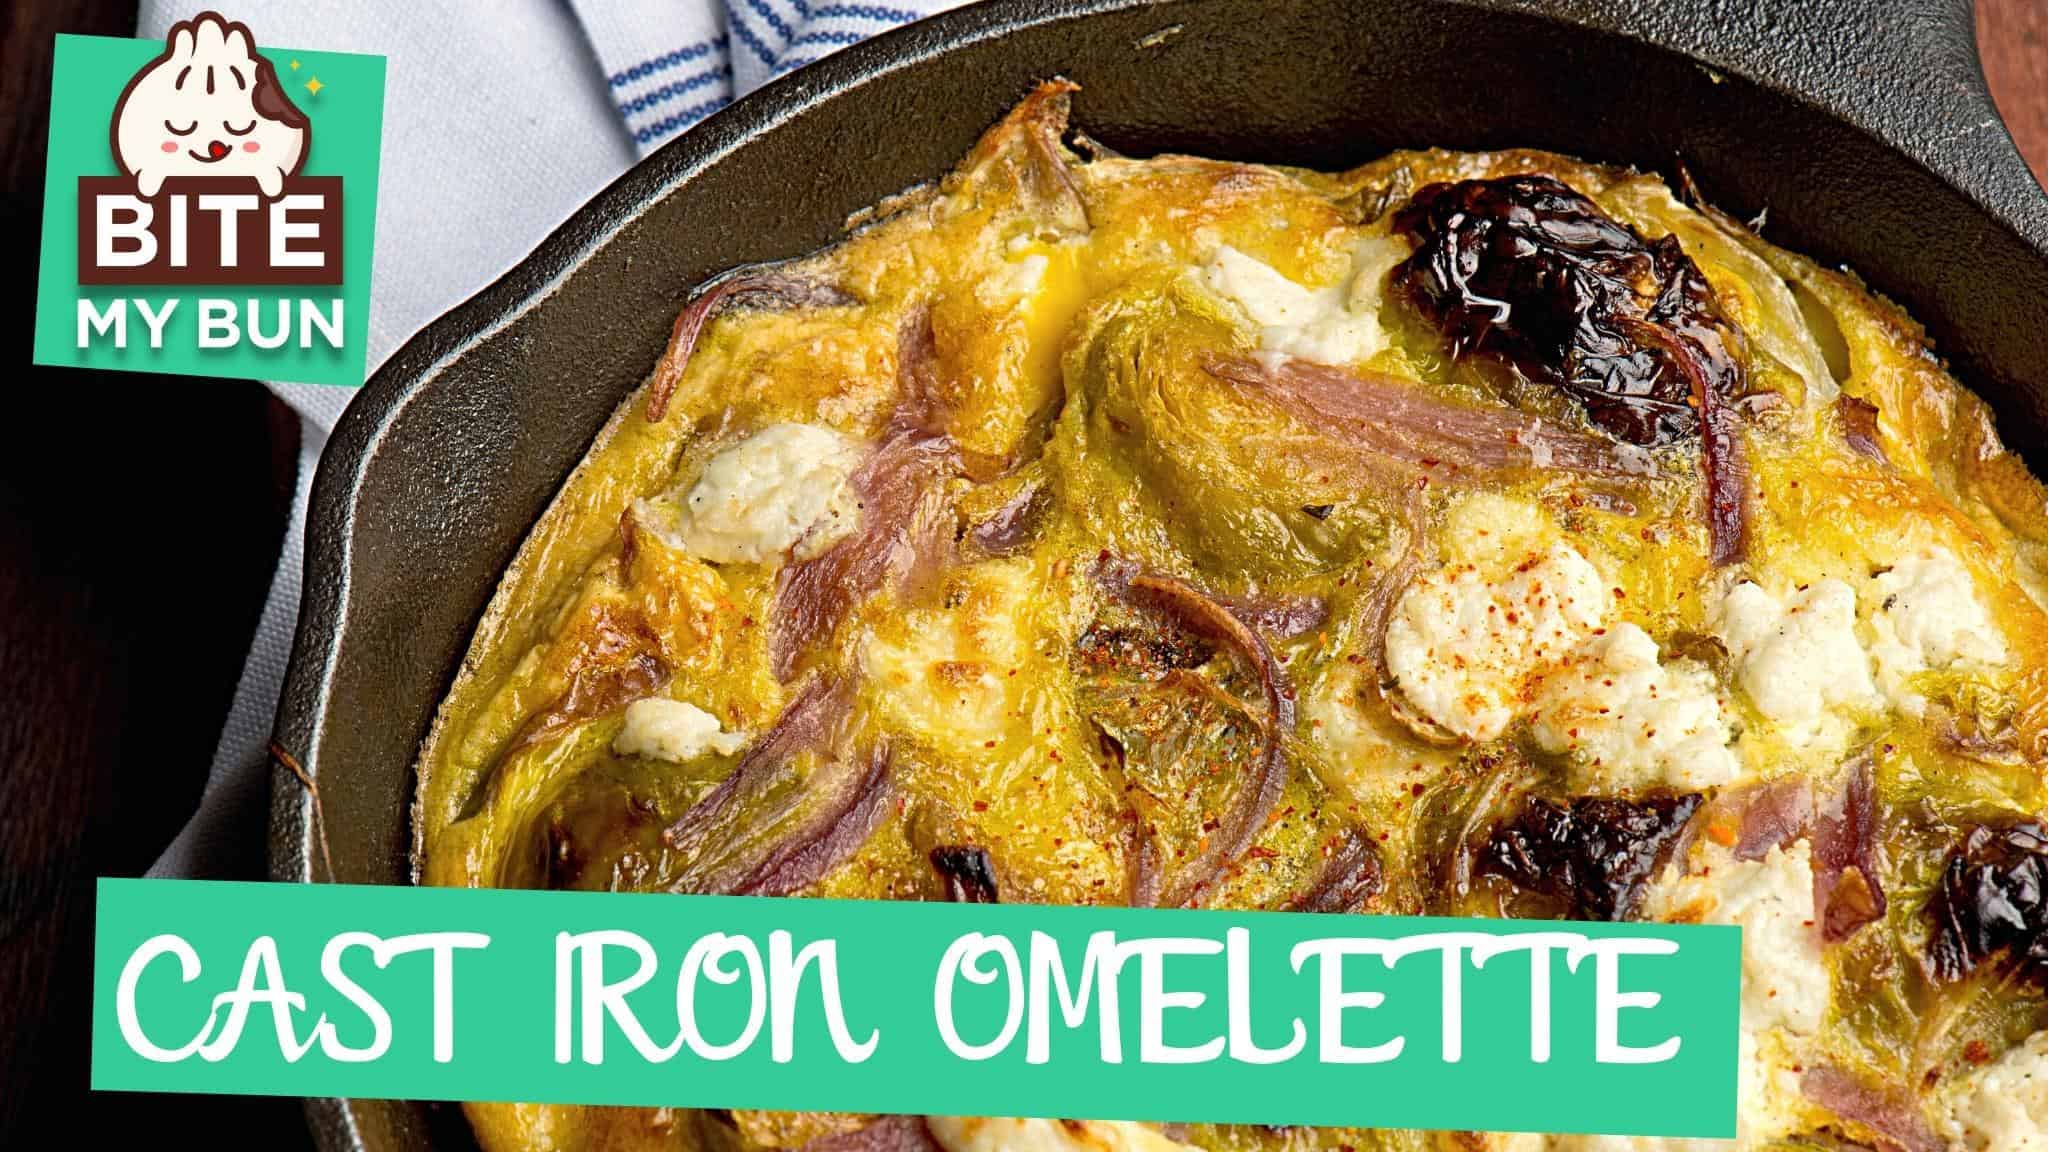 Omelette in a cast iron pan